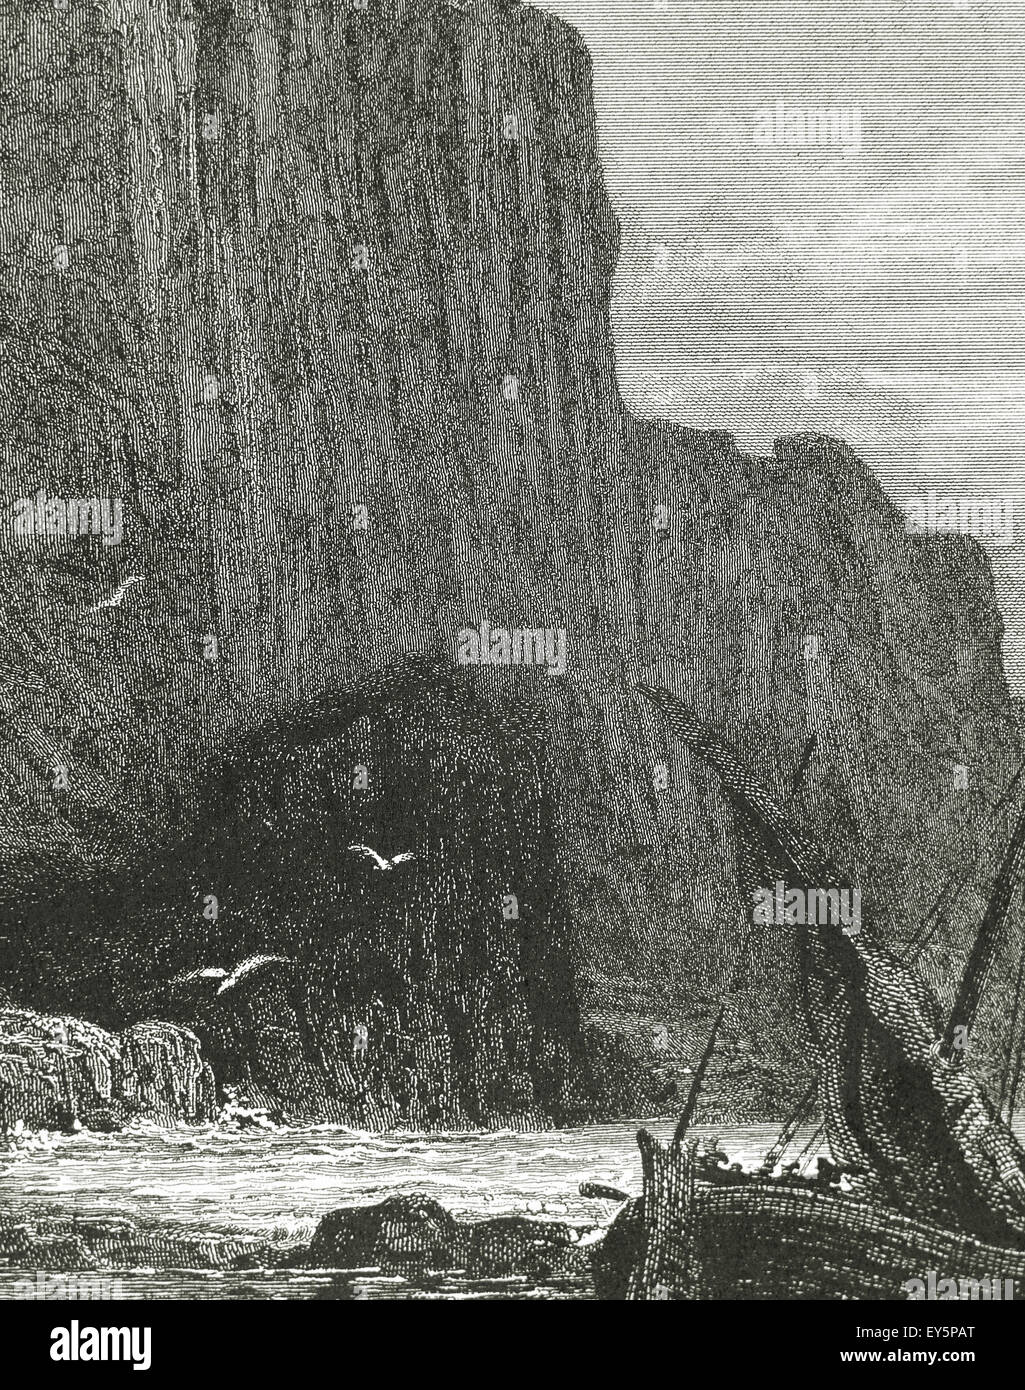 Idyls of the King by Lord Alfred Tennyson (1809-1892). Engraving by Gustave Dore. Brittany coast. Stock Photo